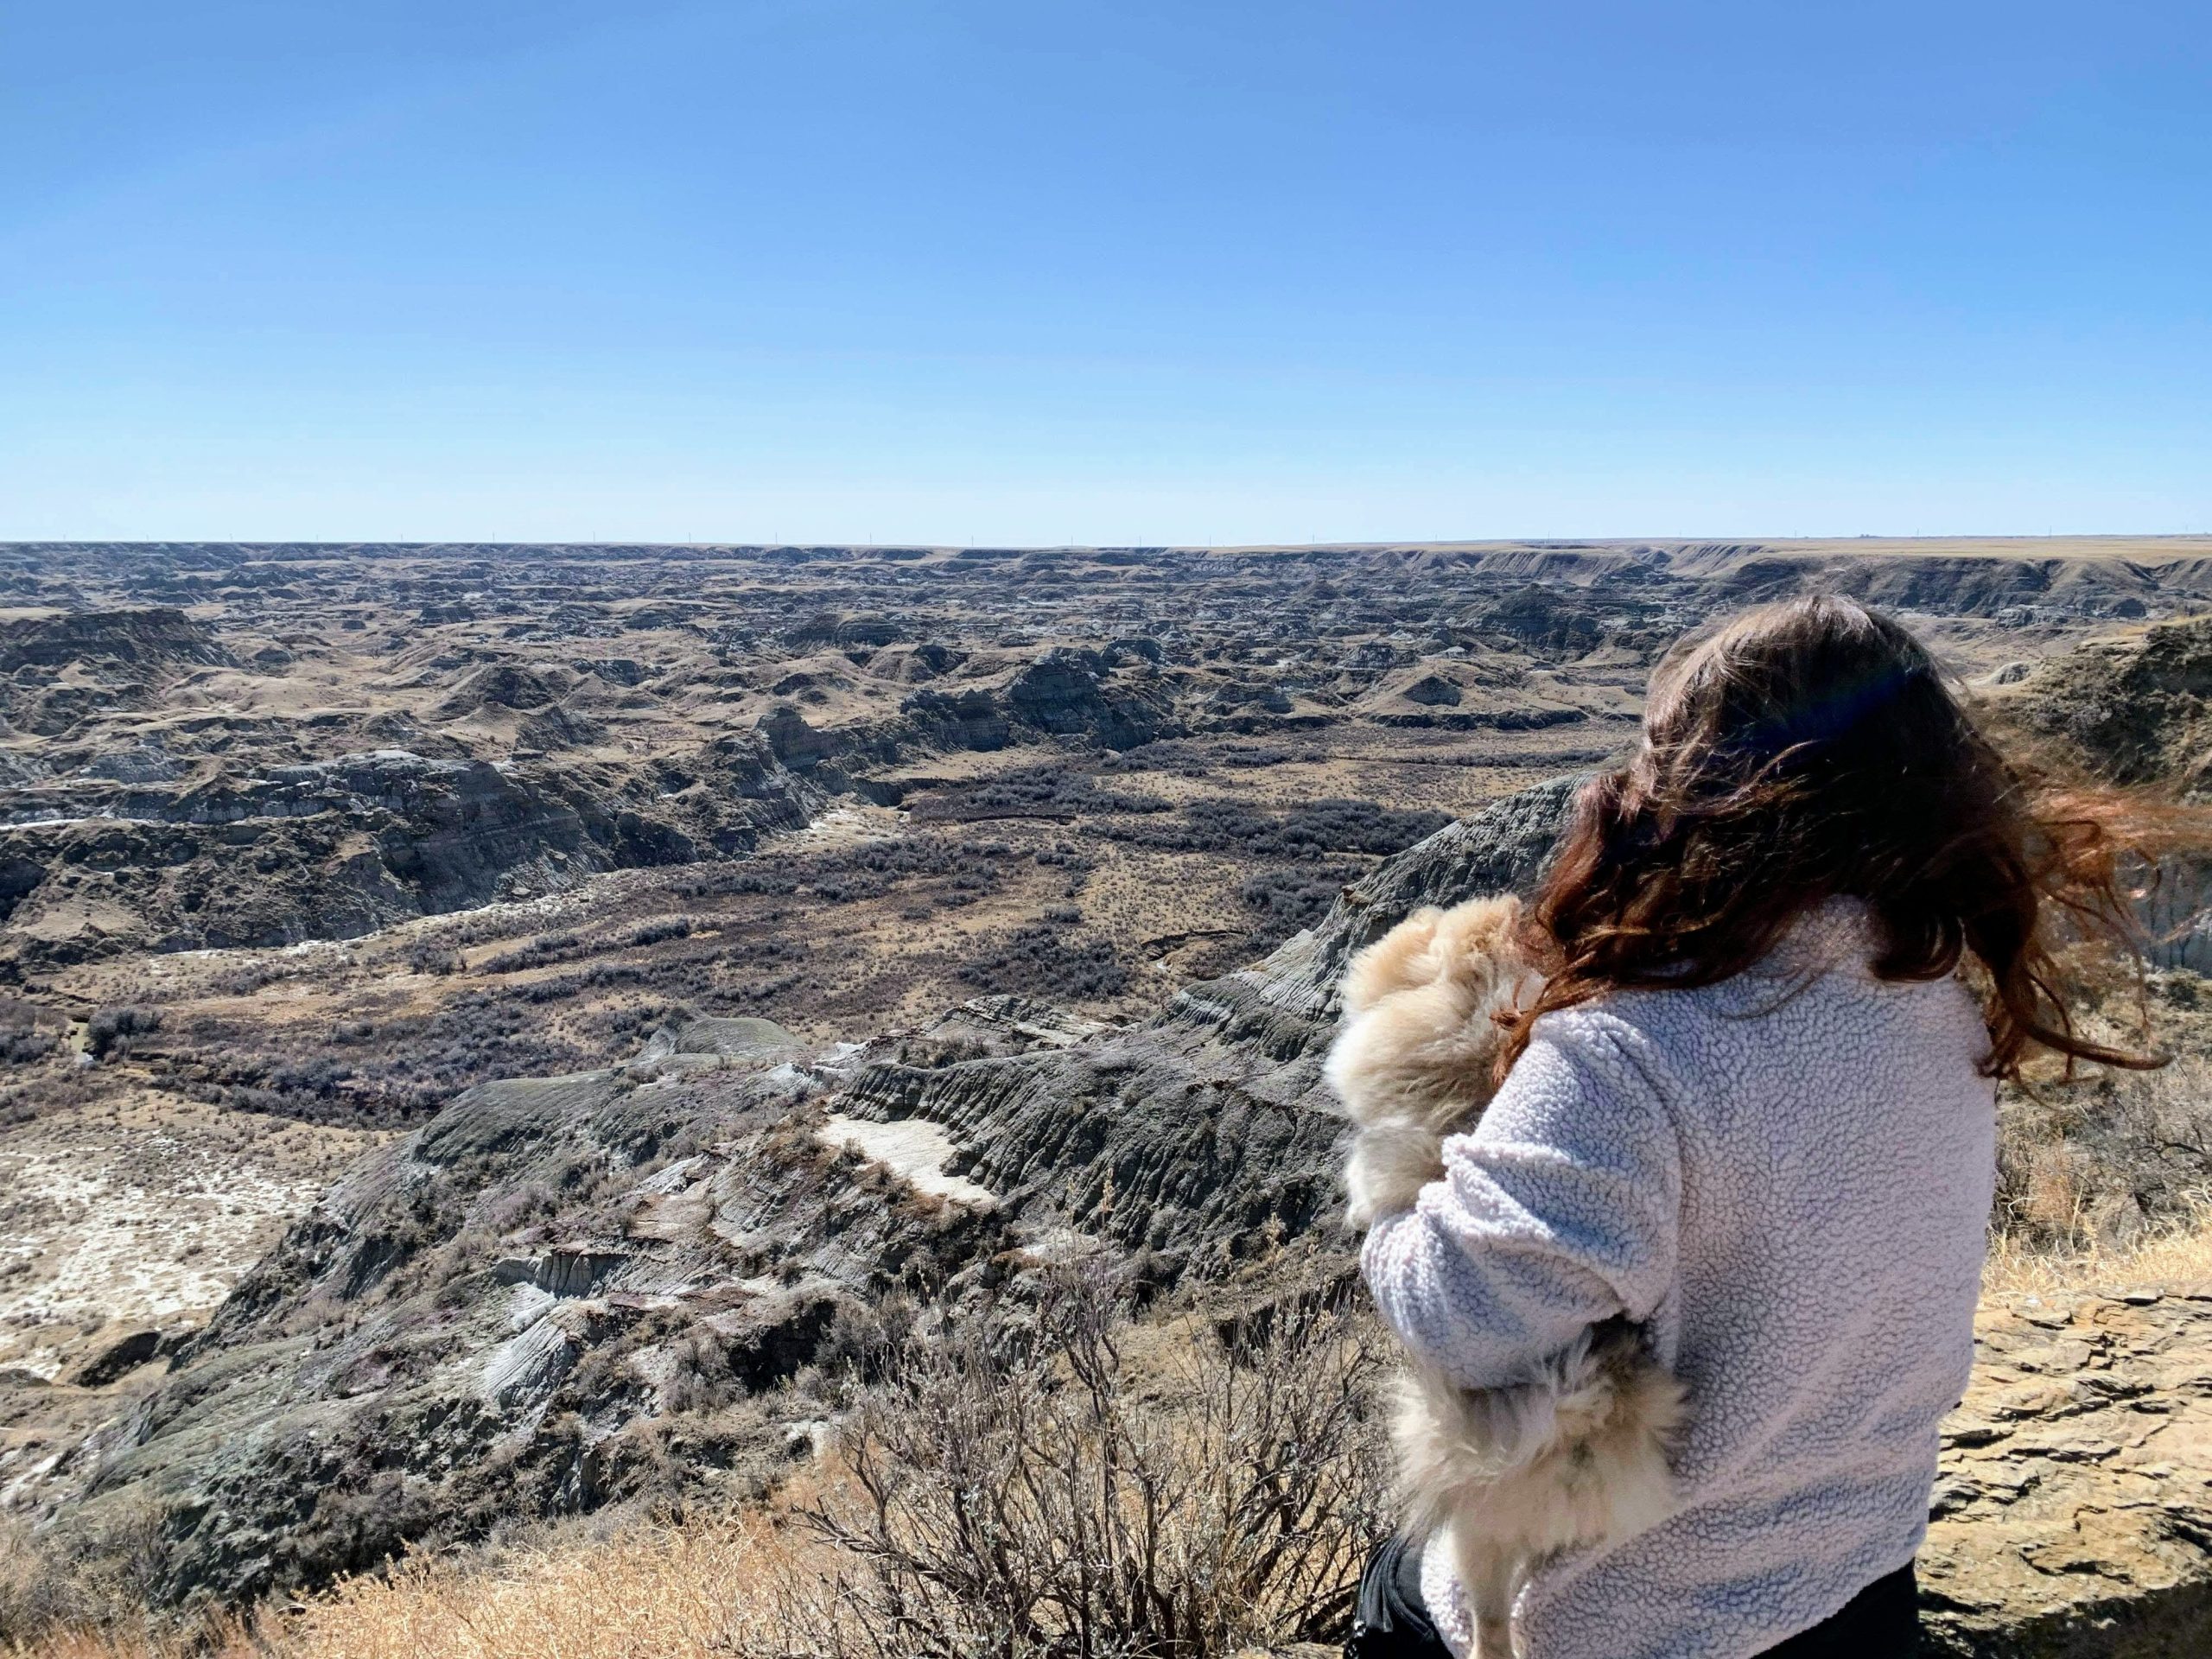 traveling with pets to fossil sites